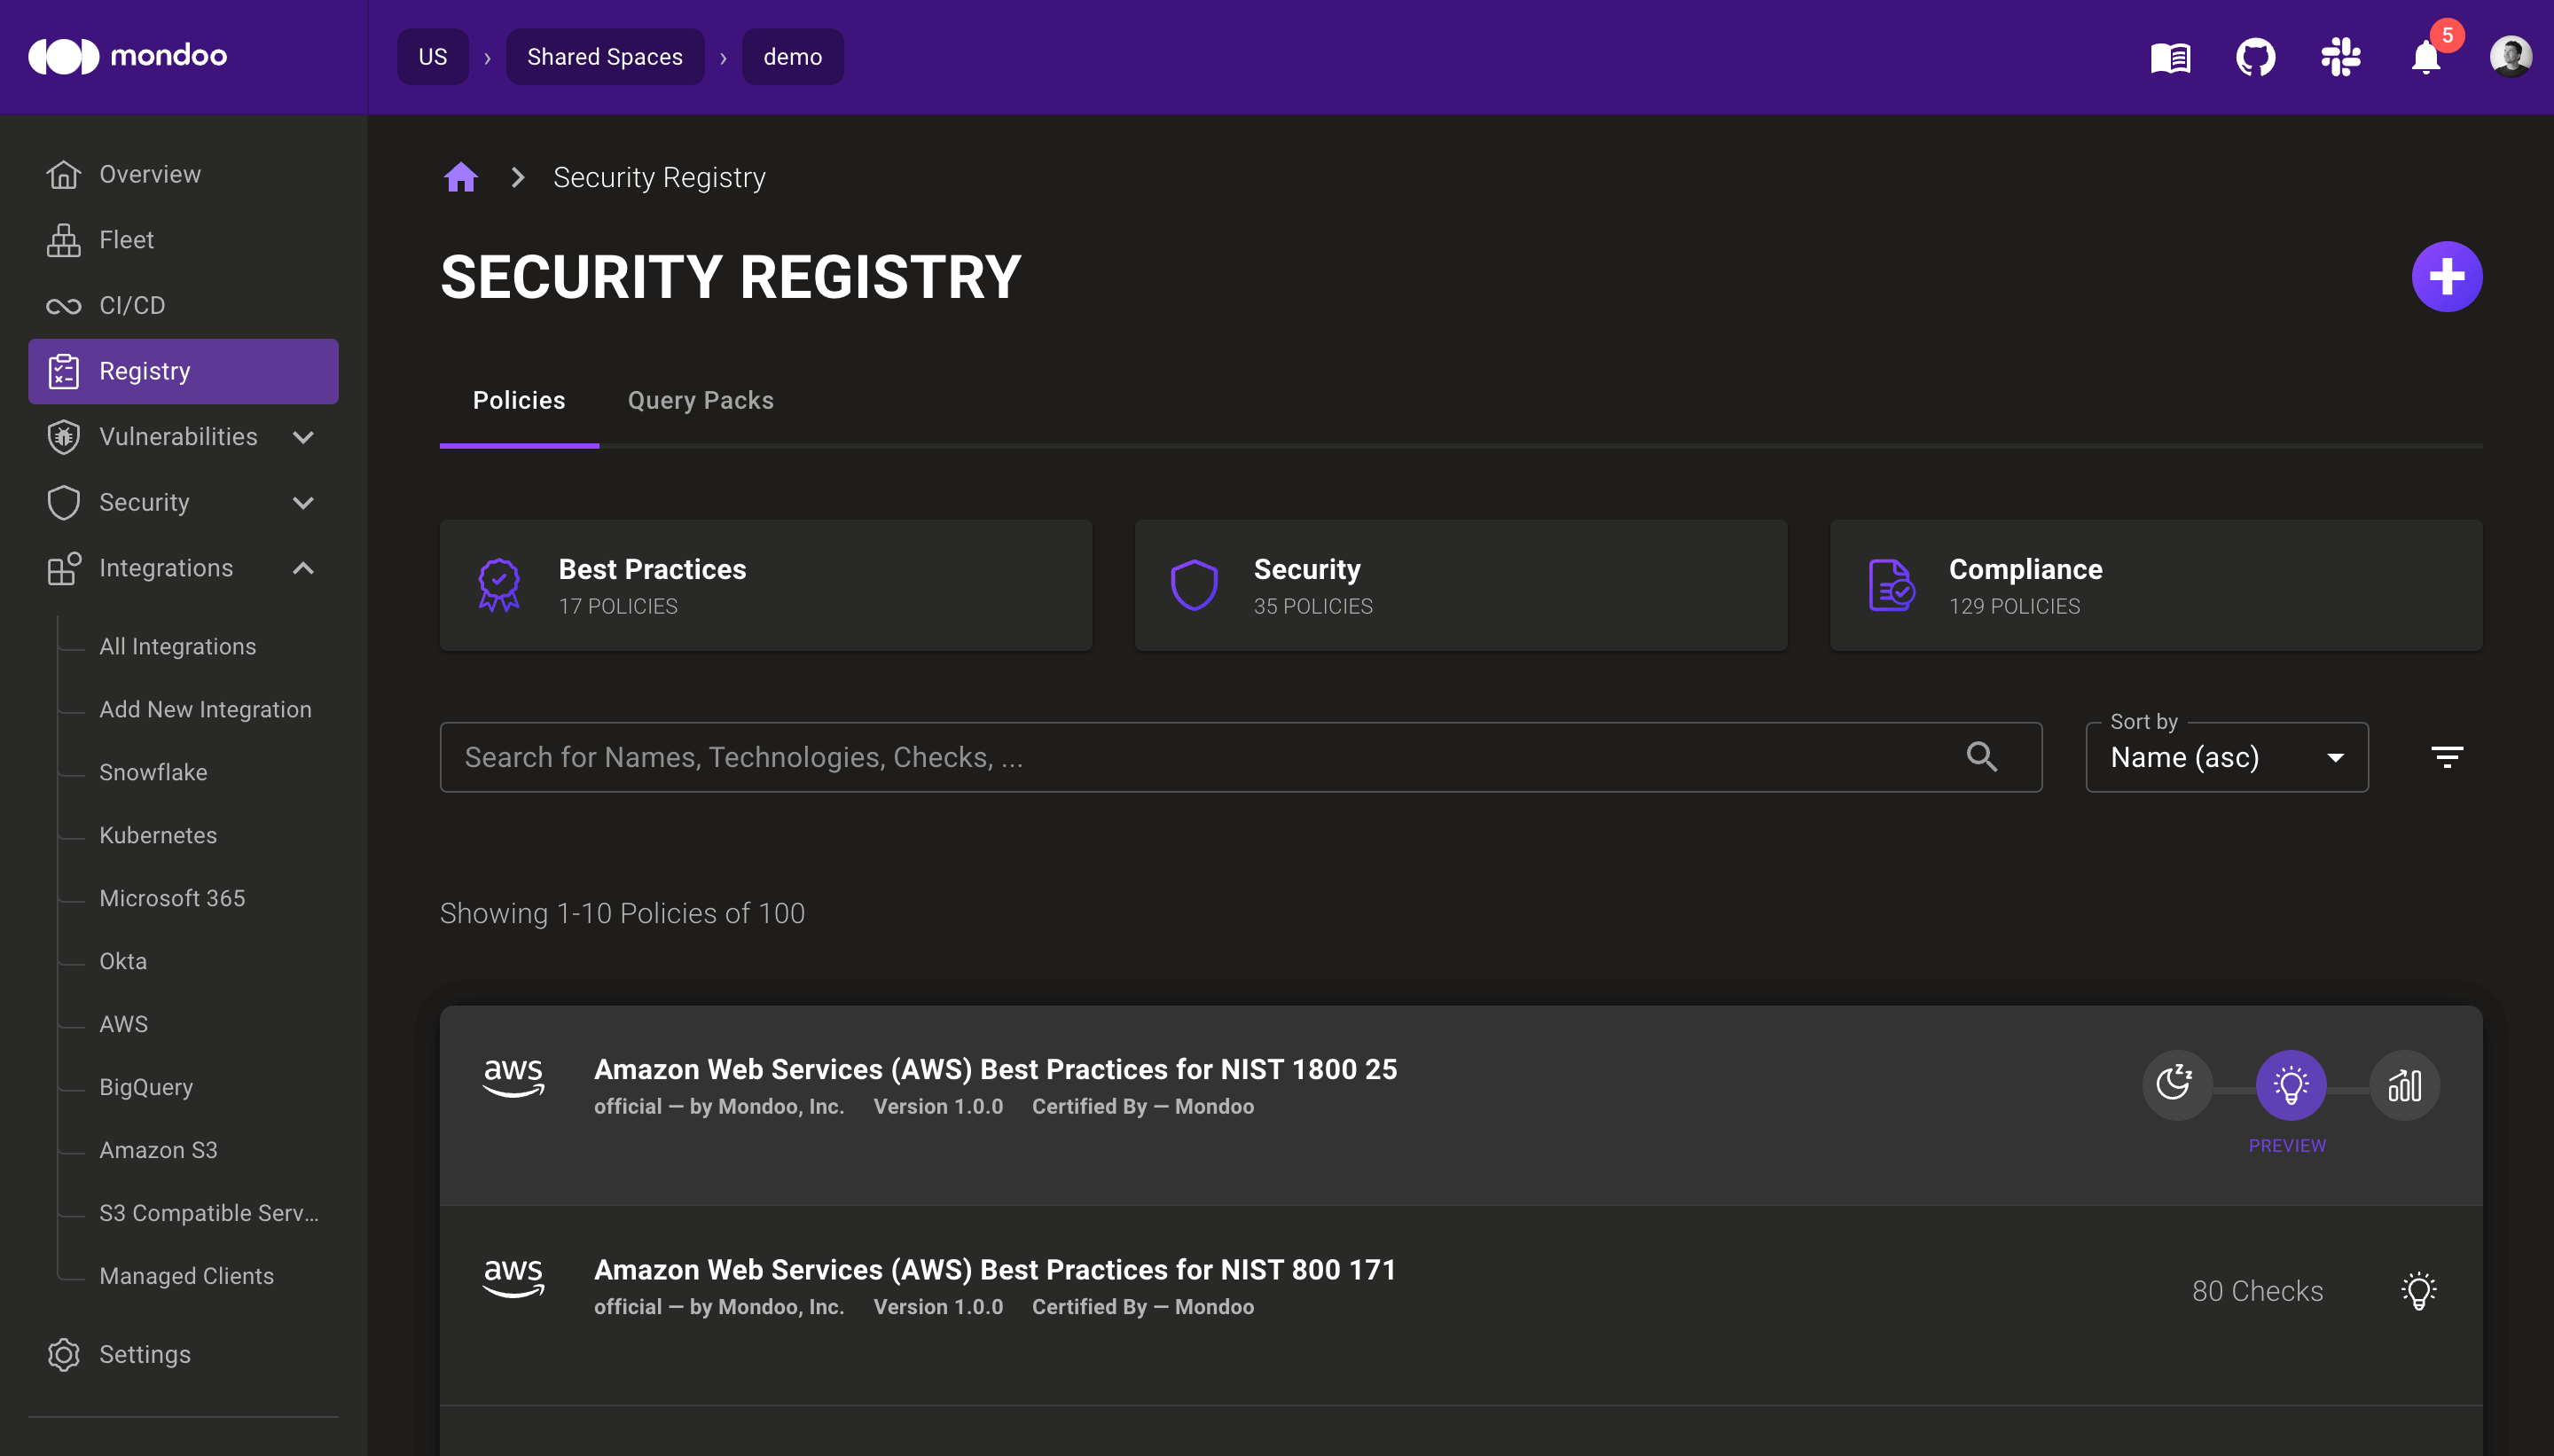 Preview Security Registry